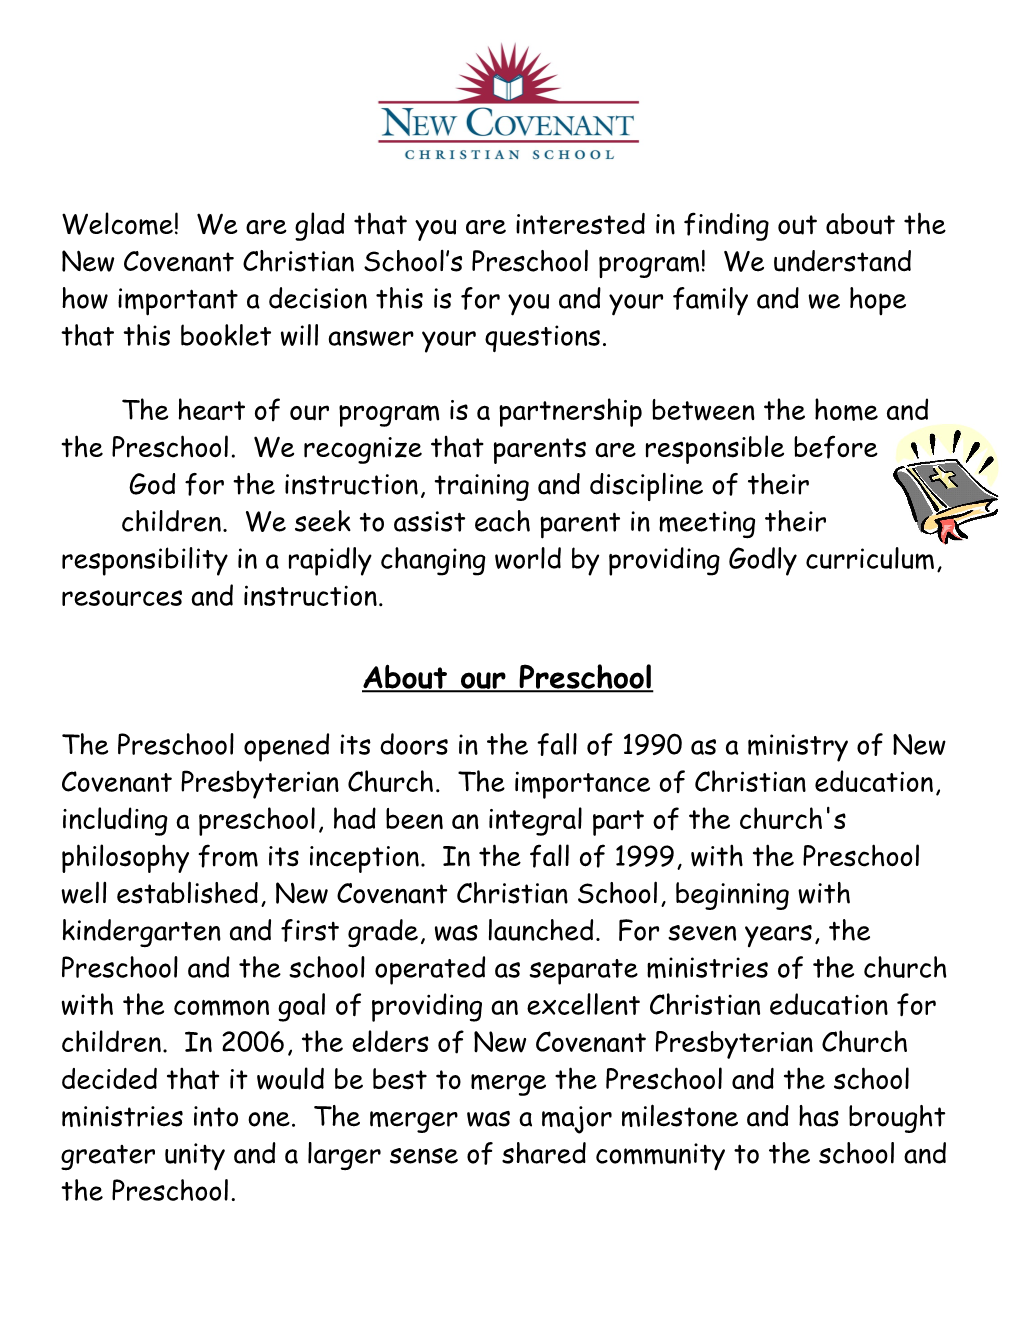 About Our Preschool